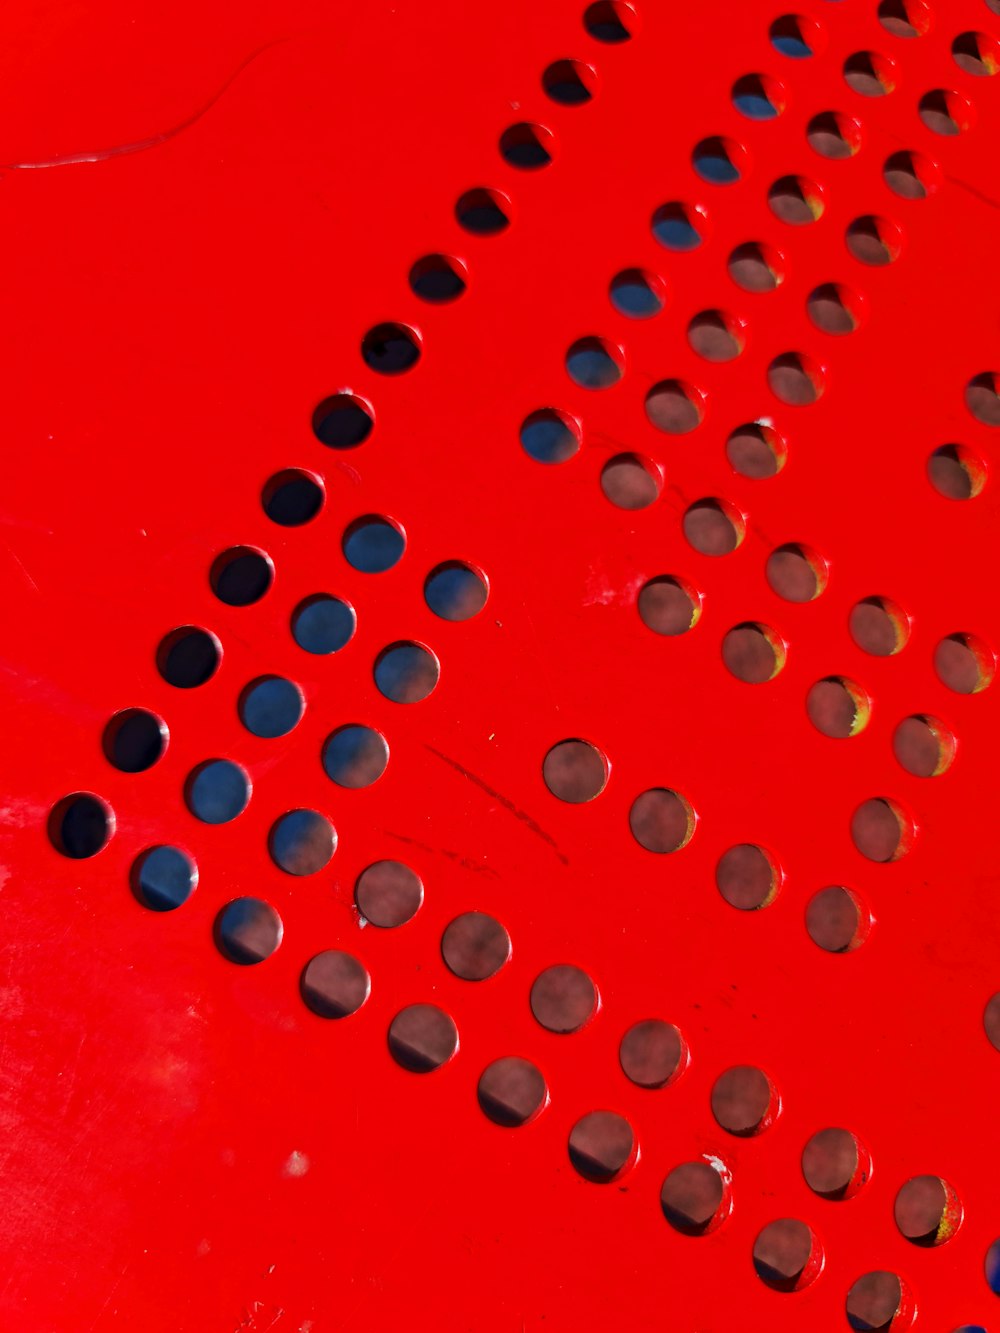 a close up of a red surface with circles on it